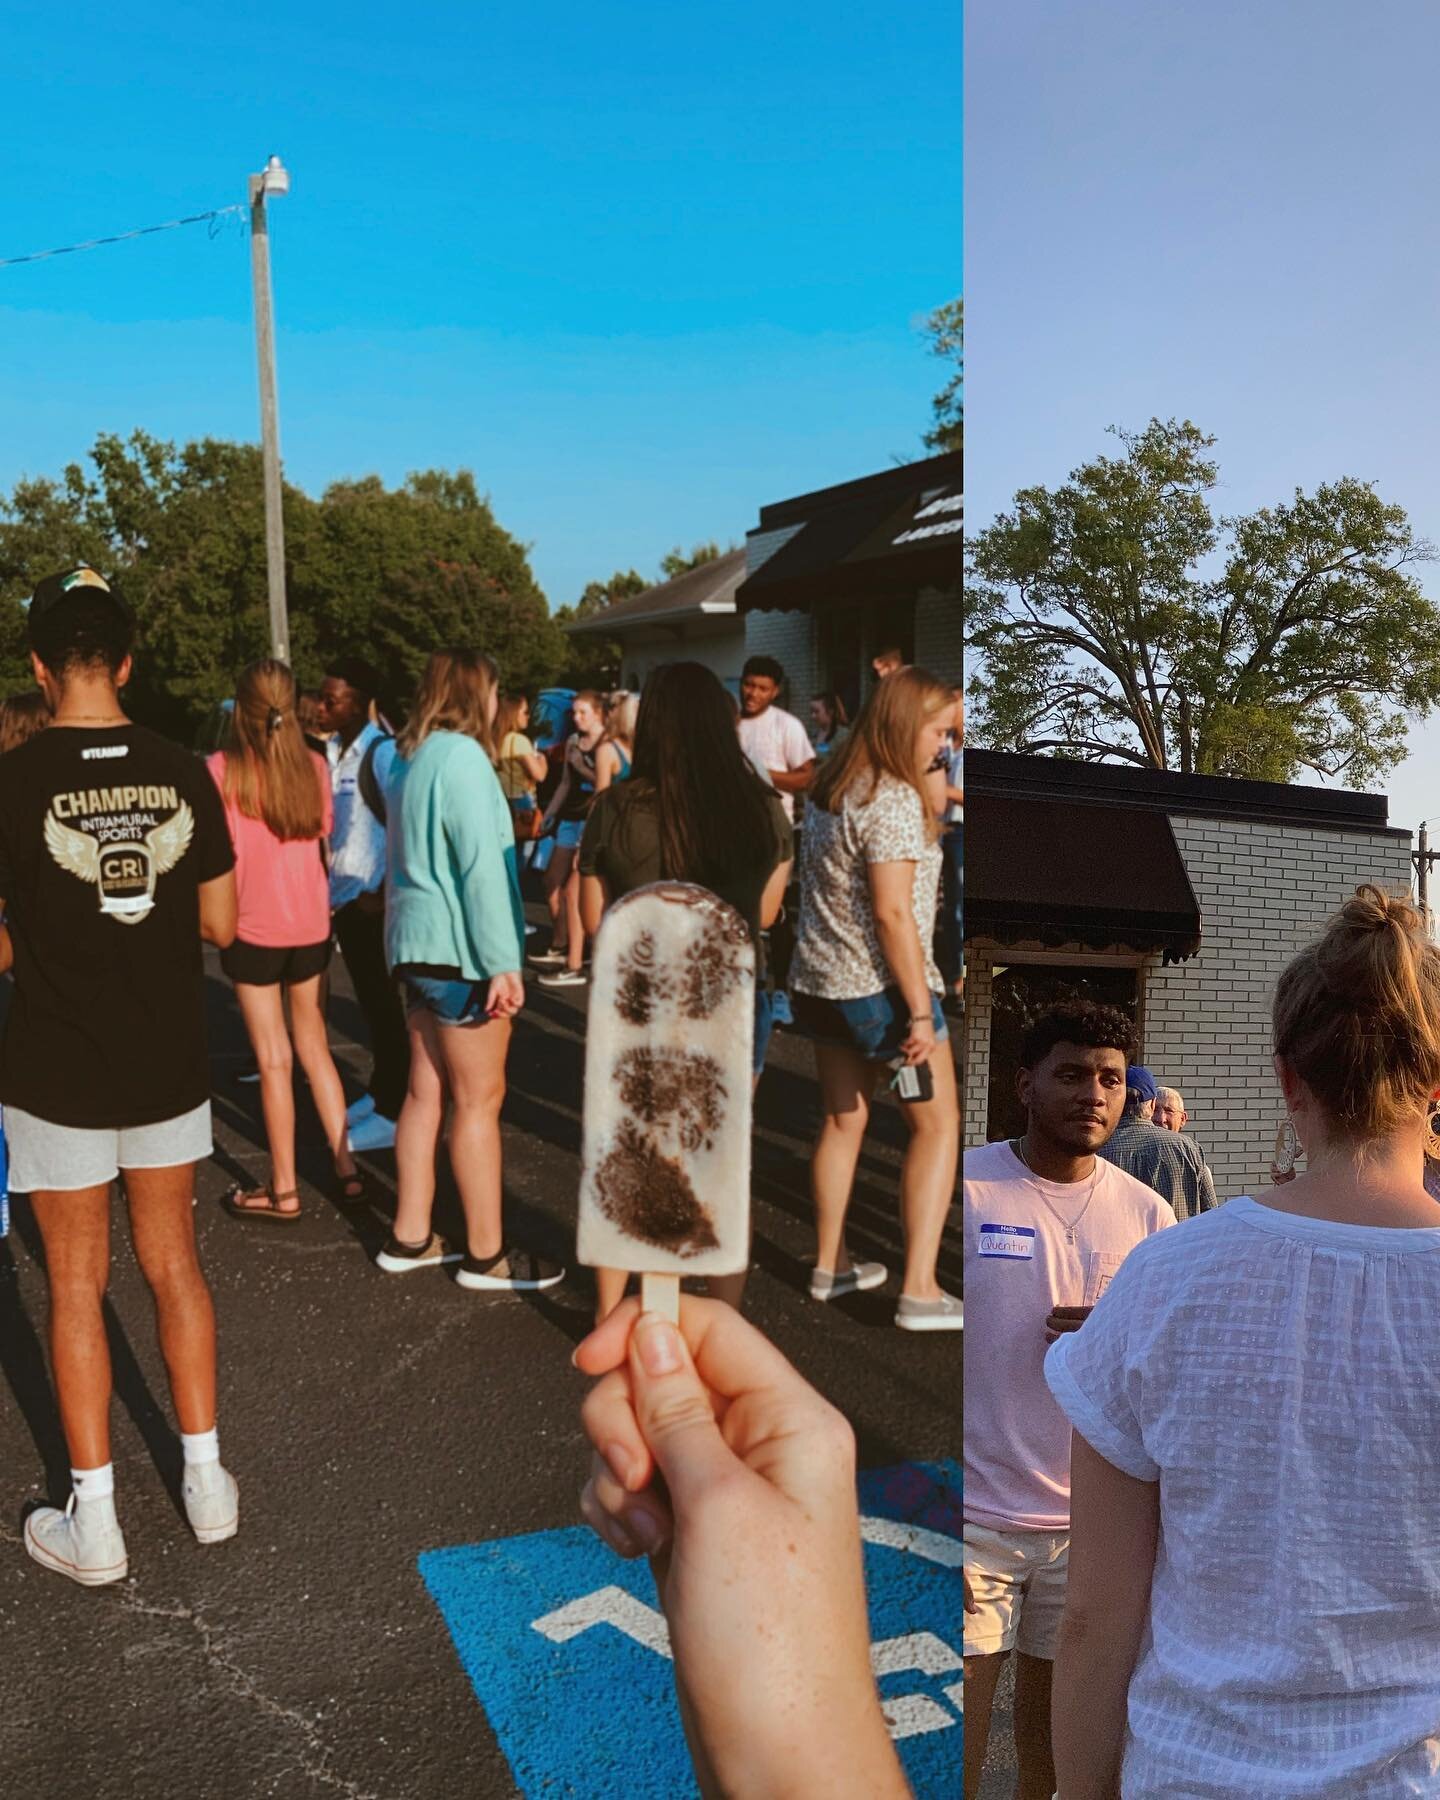 ✅COMMON POPS NIGHT!!! We had so much fun seeing everyone last night at our first welcome week event! Special thanks to @commonpopsgwd for coming out to BCM.